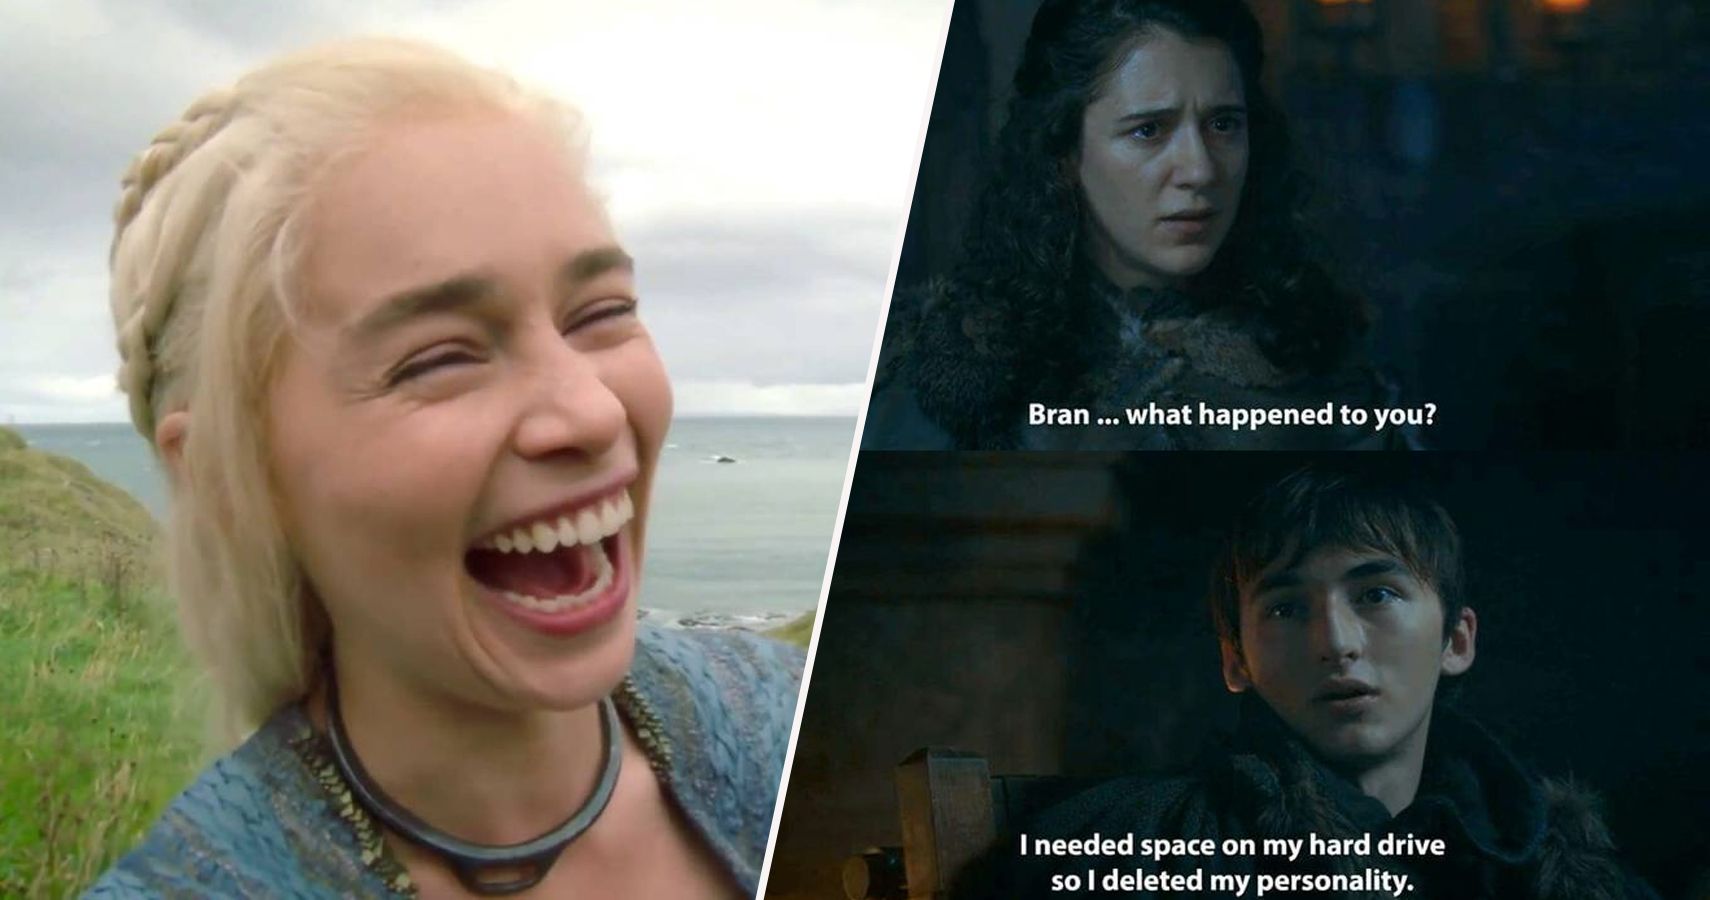 20 Game Of Thrones Memes That Show It Makes No Sense